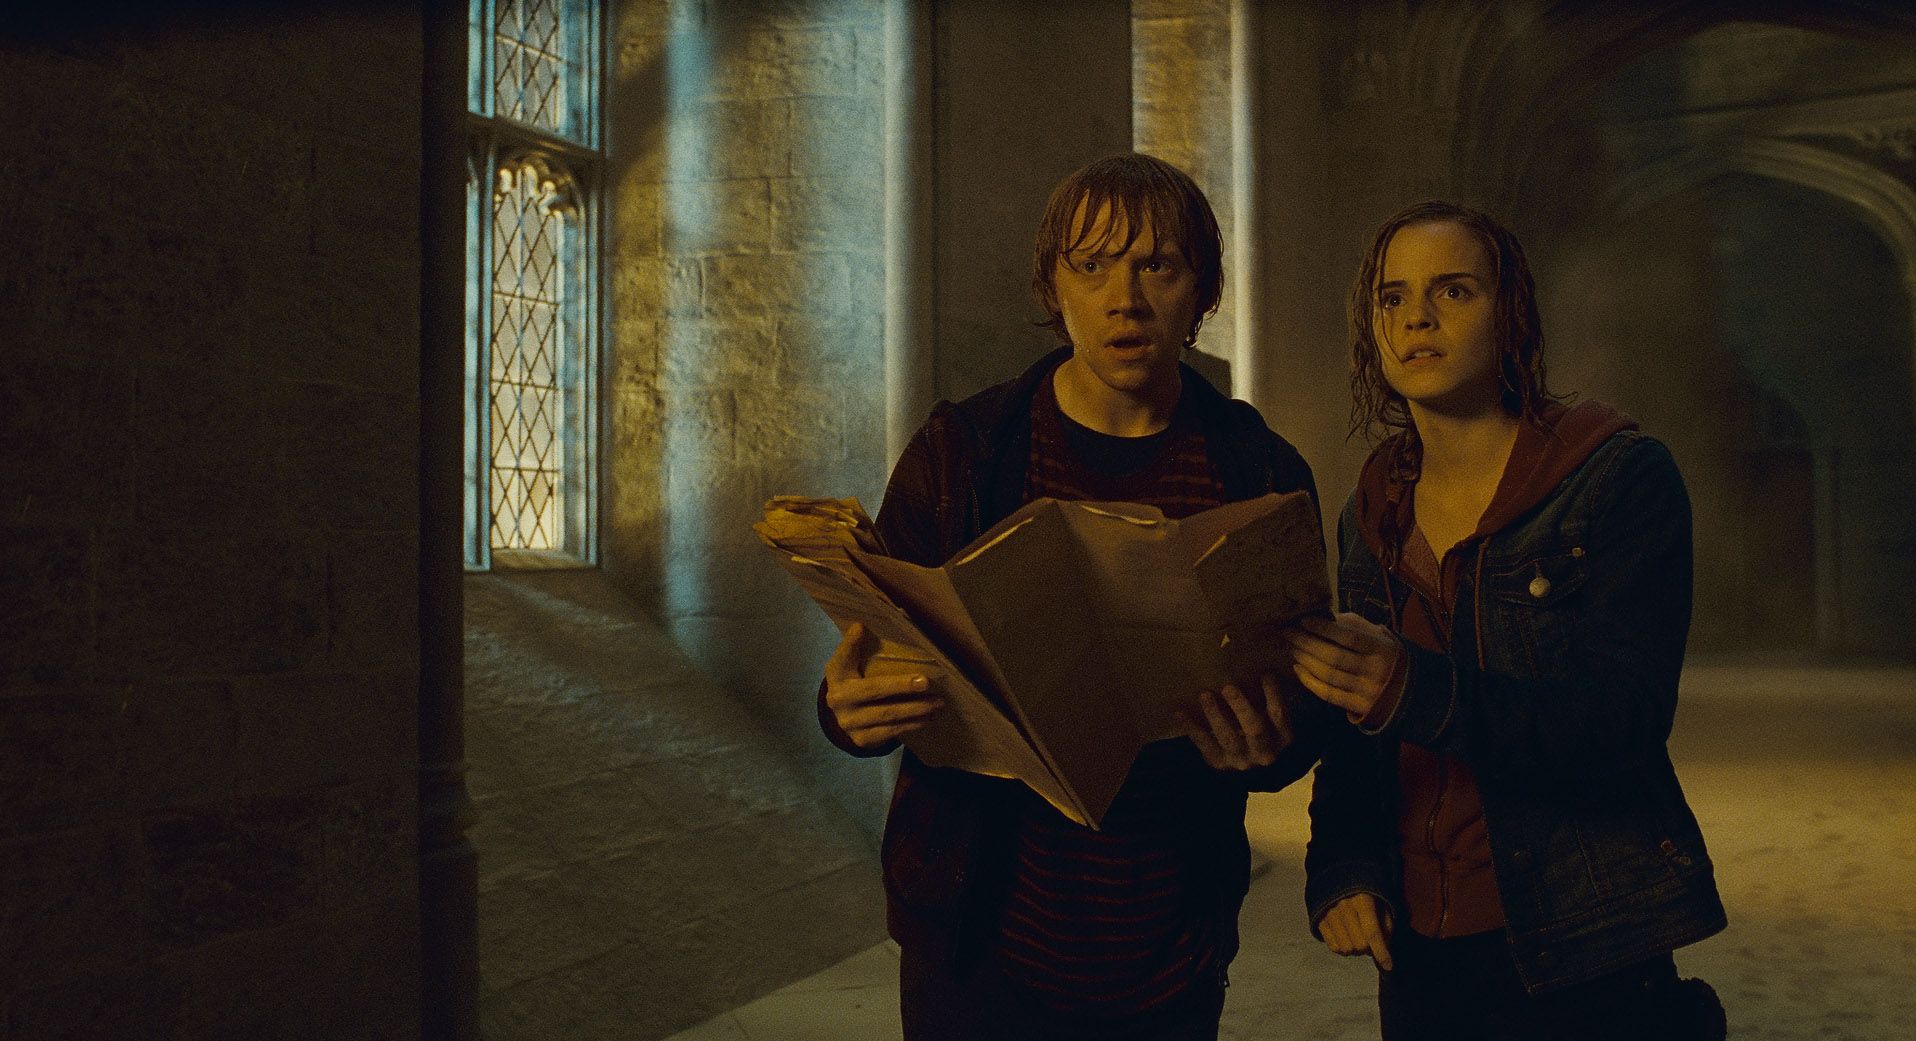 Harry Potter and the Deathly Hallows - Part 2 Photo #2